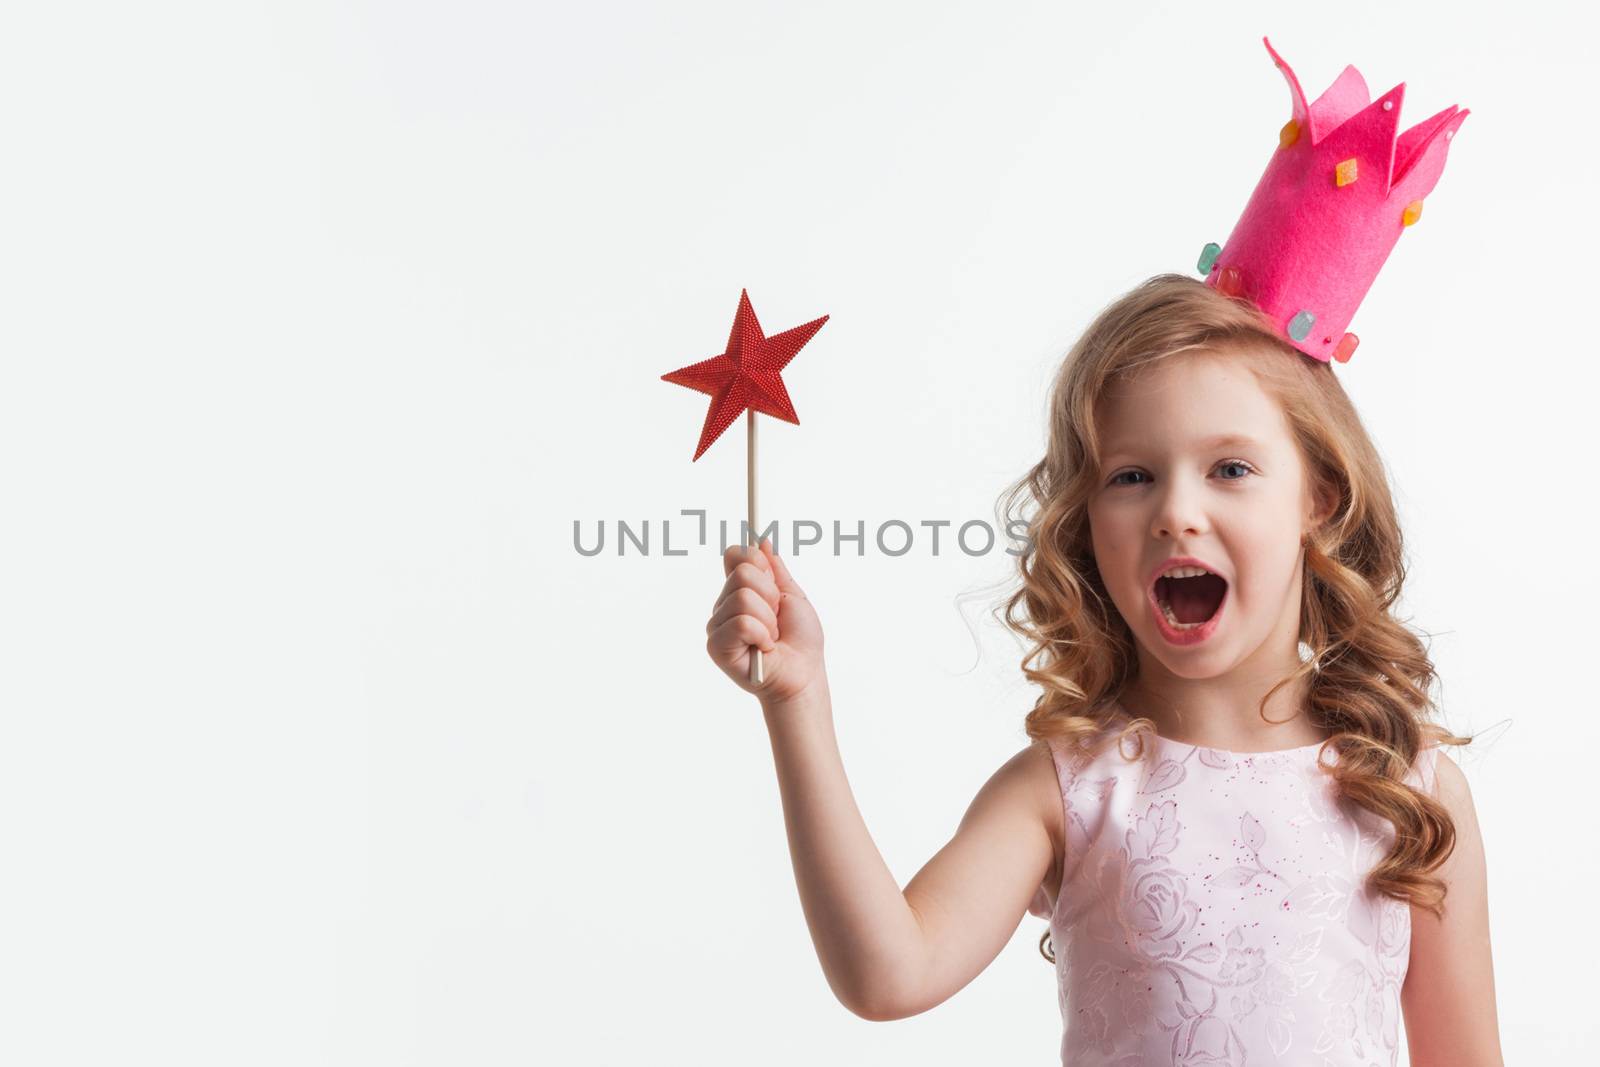 Beautiful little candy princess girl in crown holding star shaped magic wand isolated on white